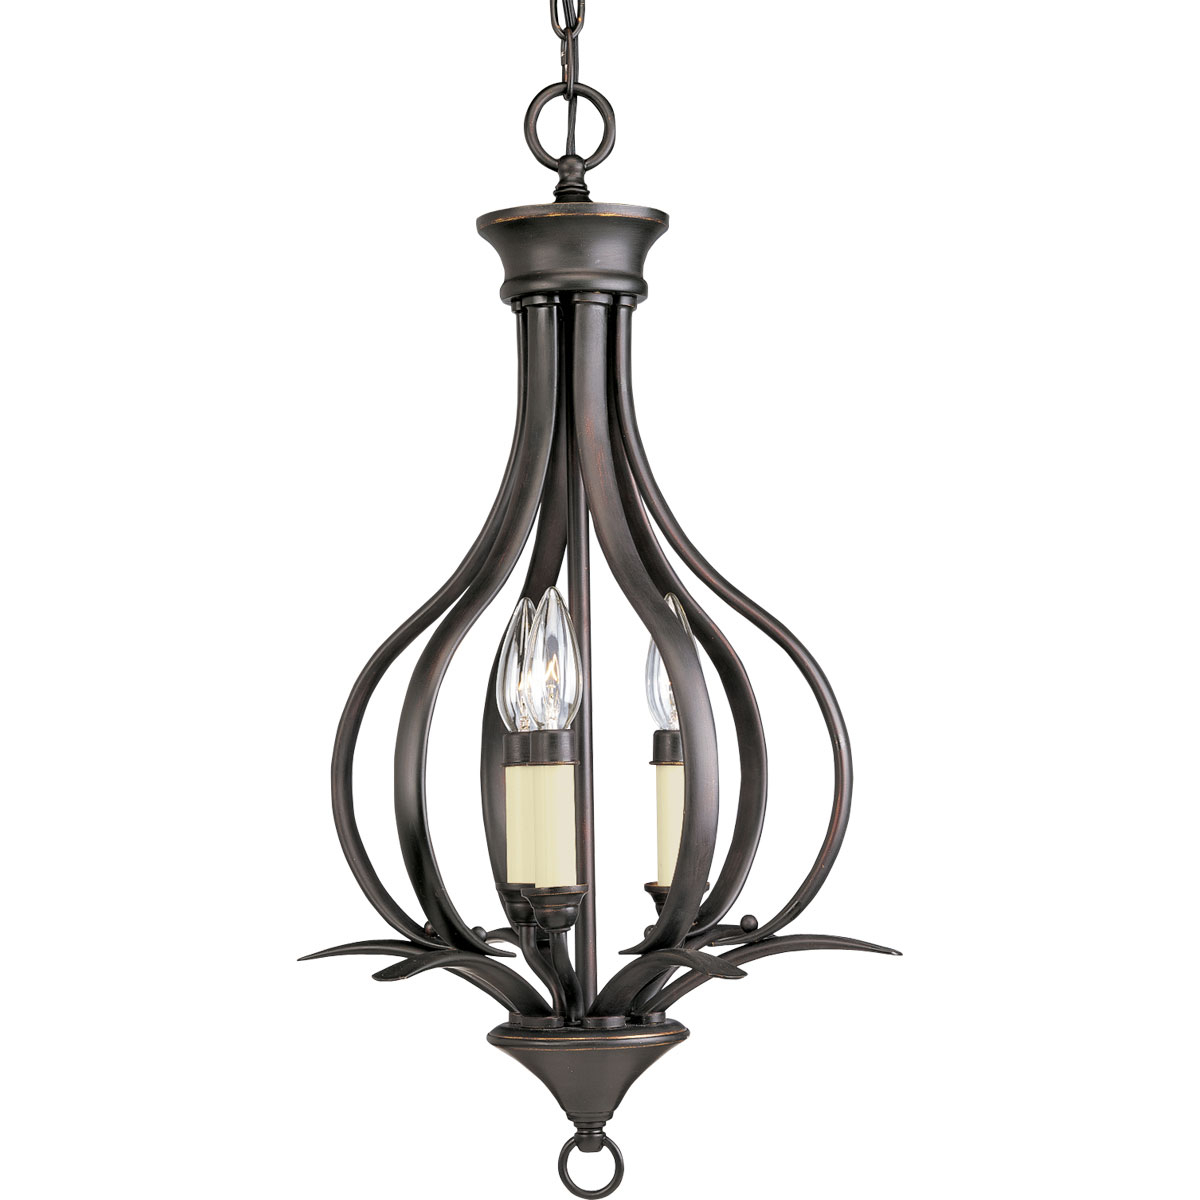 Three-light hall and foyer fixture featuring soft angles, curving lines. Gracefully exotic, the Trinity Collection offers classic sophistication for transitional interiors. Sculptural forms of metal are enhanced by a classic finish. This transitional style can transform a room or your whole home with its charming versatility. Antique Bronze finish.